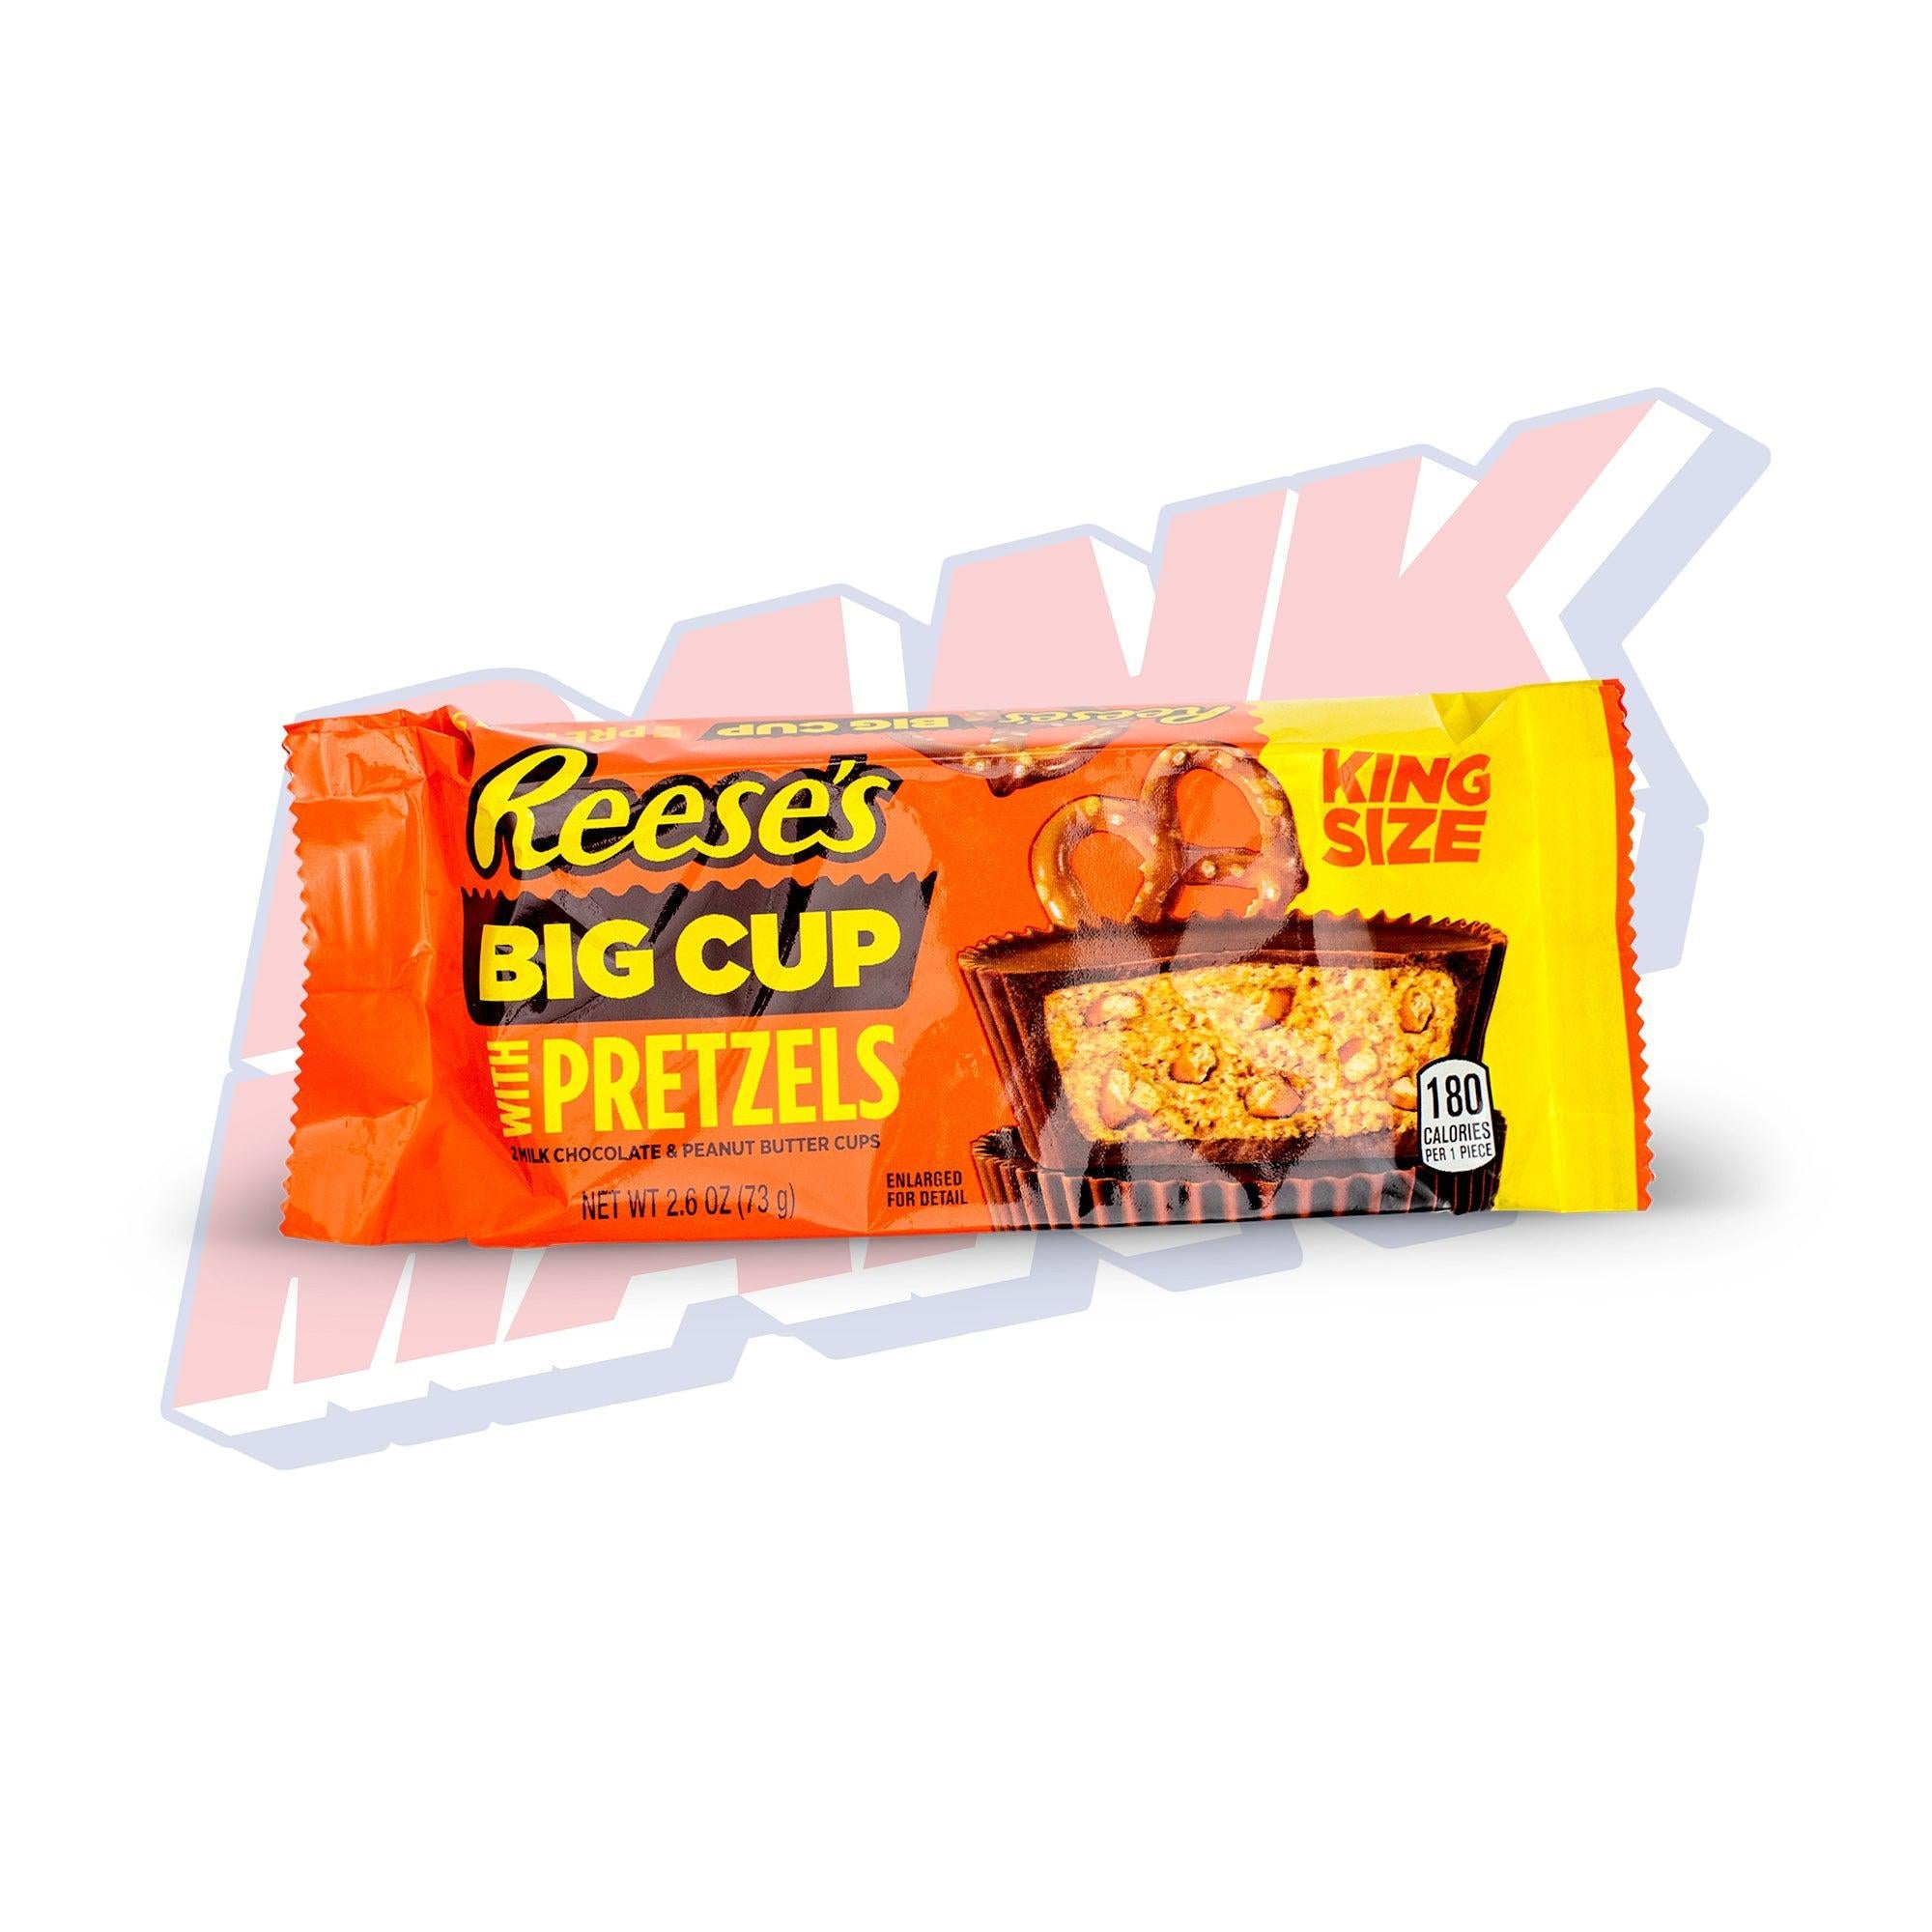 Reese's Big Cup Stuffed With Pretzels King - 2.6oz